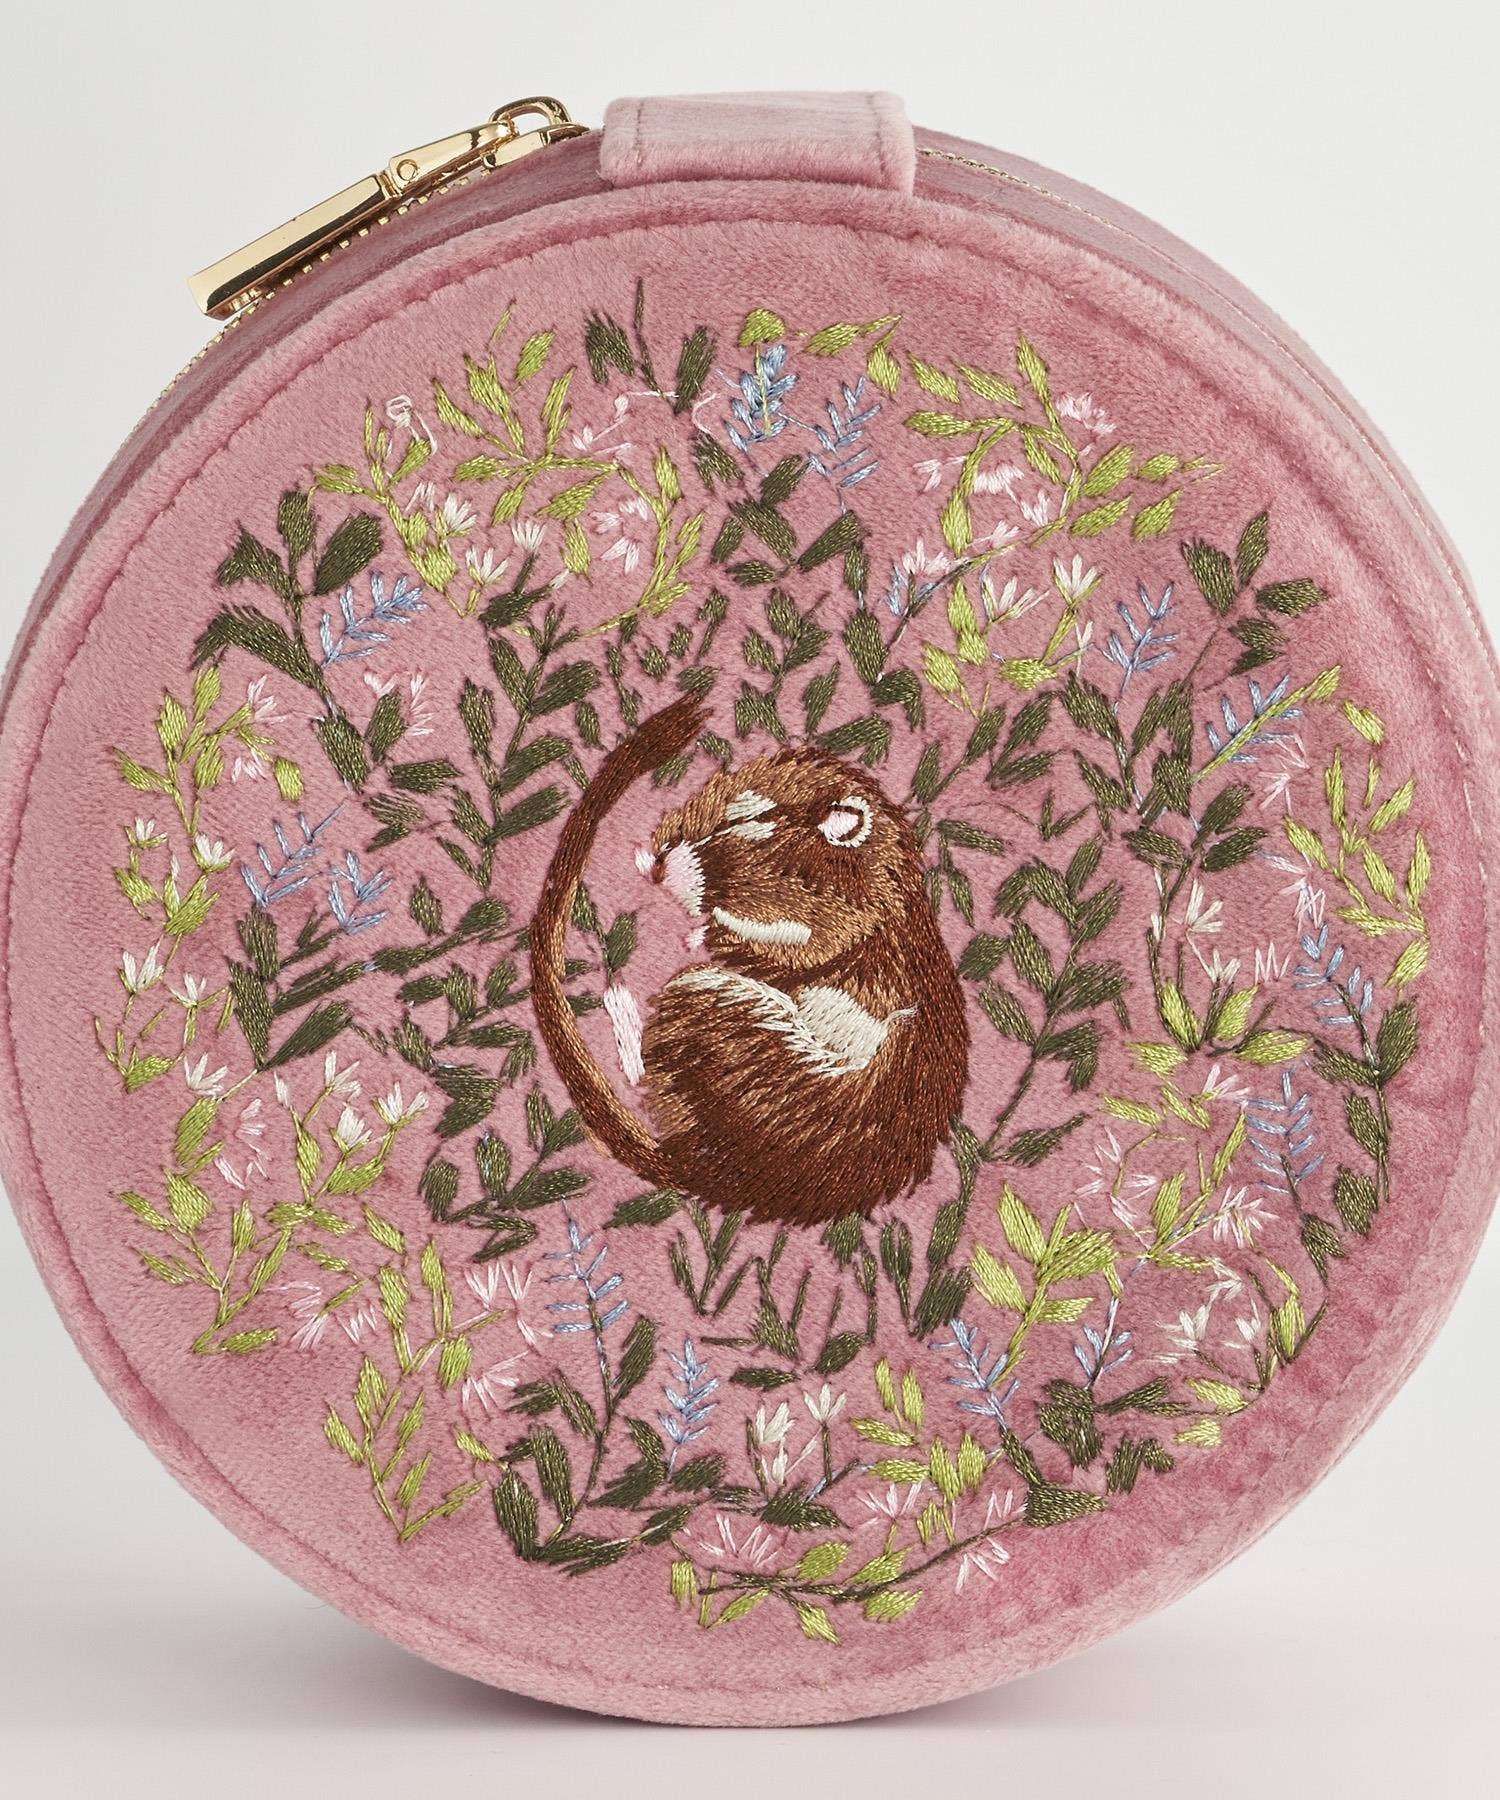 Fable Chloe Dormouse Jewellery box - Pink - Out of the Blue